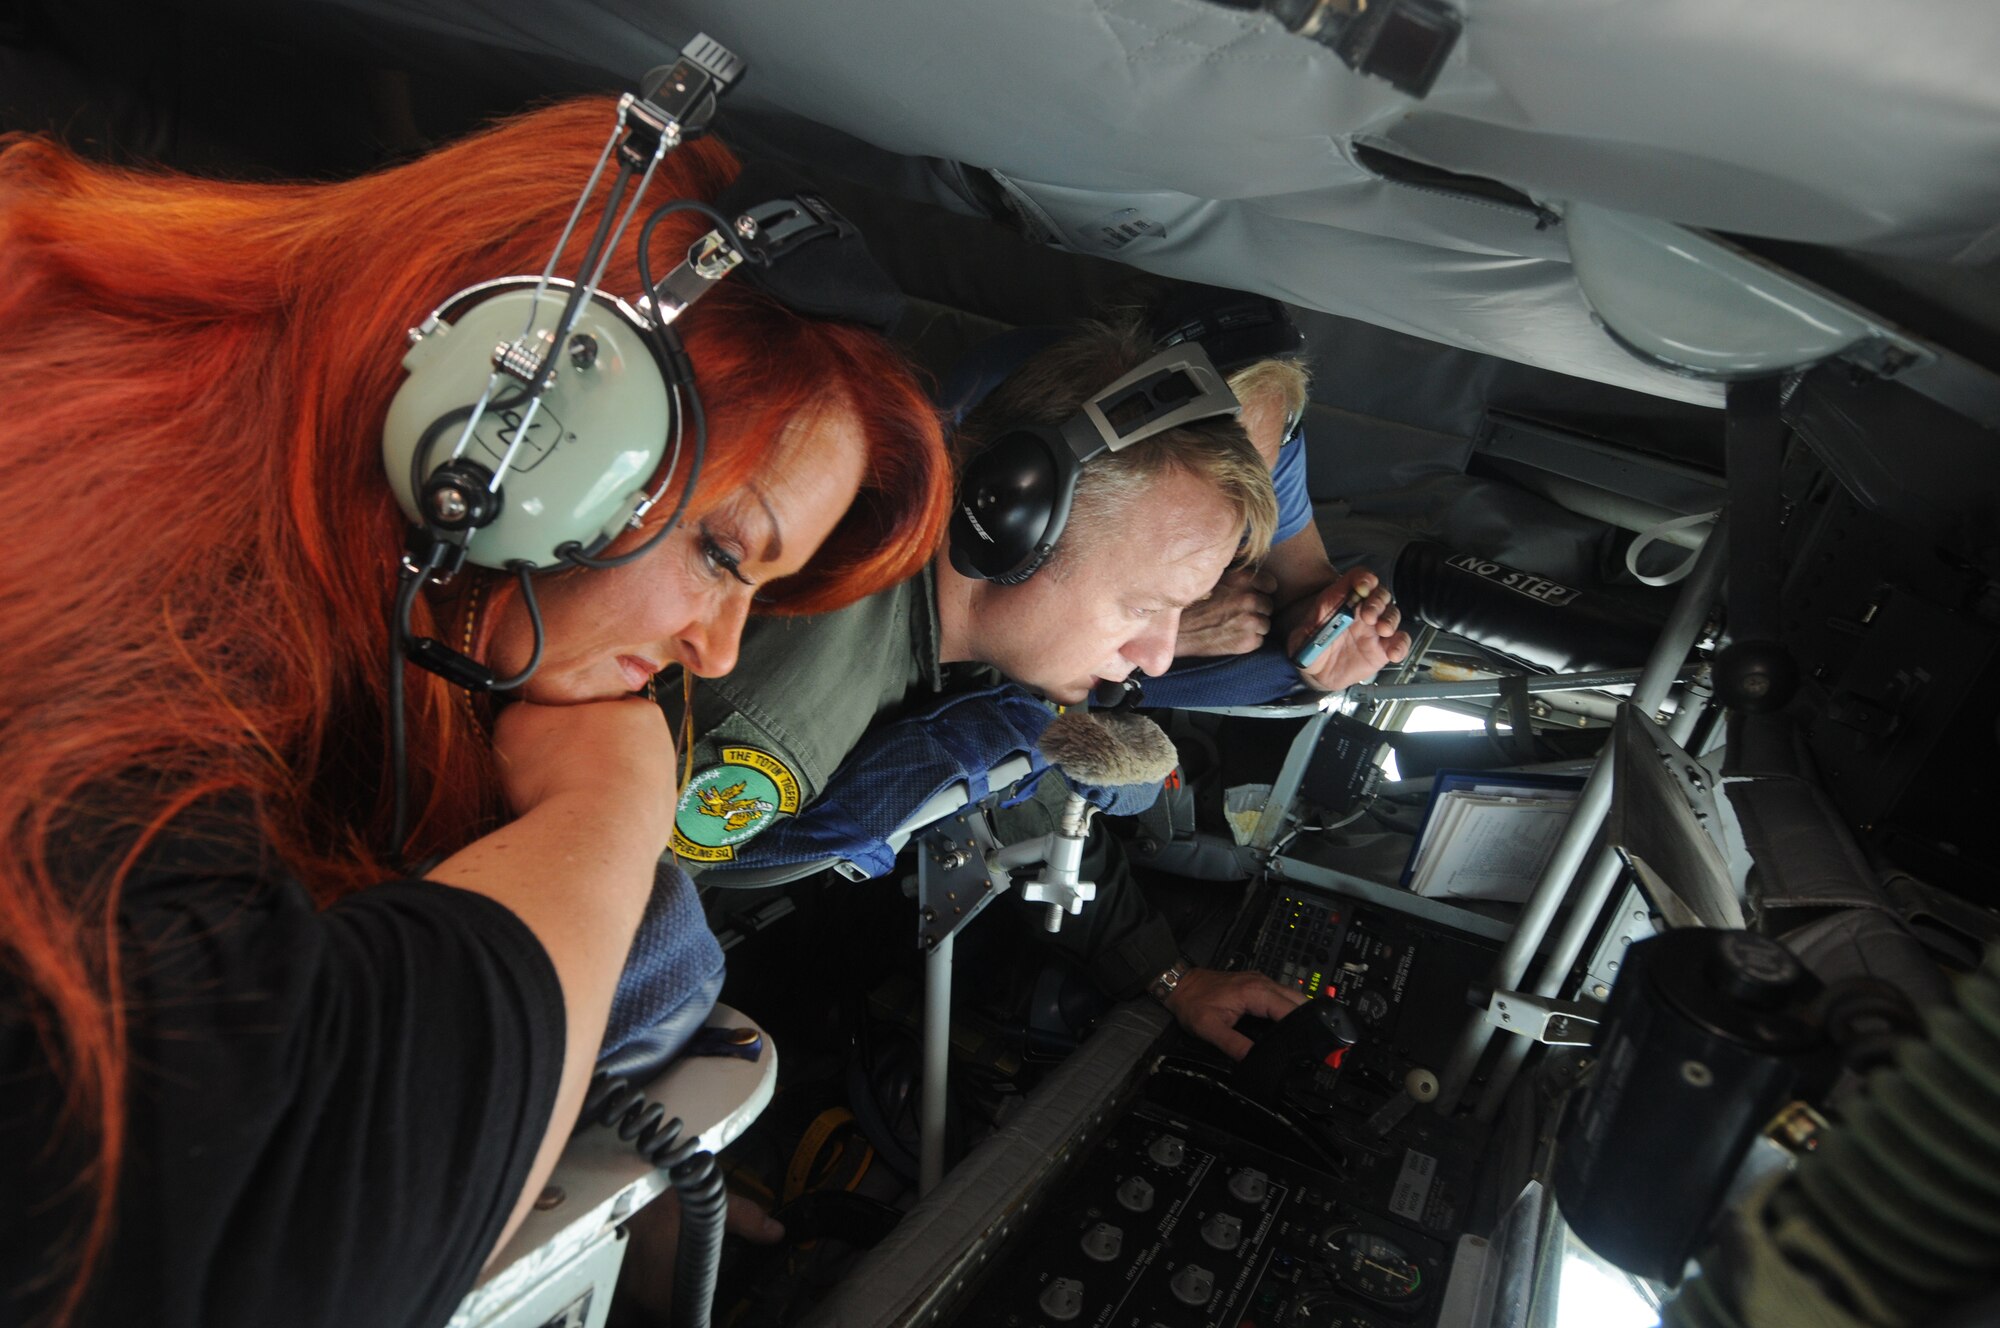 Wynonna Judd observes as Master Sgt. Riccardo Bonicelli operates the boom in a KC-135 during an in-flight refueling mission June 30, 2011, somewhere over the southeastern United States. Ms. Judd, a 5-time Grammy Award winning country singer, is the featured artist for the Independence Day Concert in Warner Robins, Ga., July 1. The KC-135 from the Air Force Reserve's 916th Air Refueling Wing, refueled a pair of F-15E Strike Eagles during the mission. (U.S. Air Force photo/Ken Hackman)